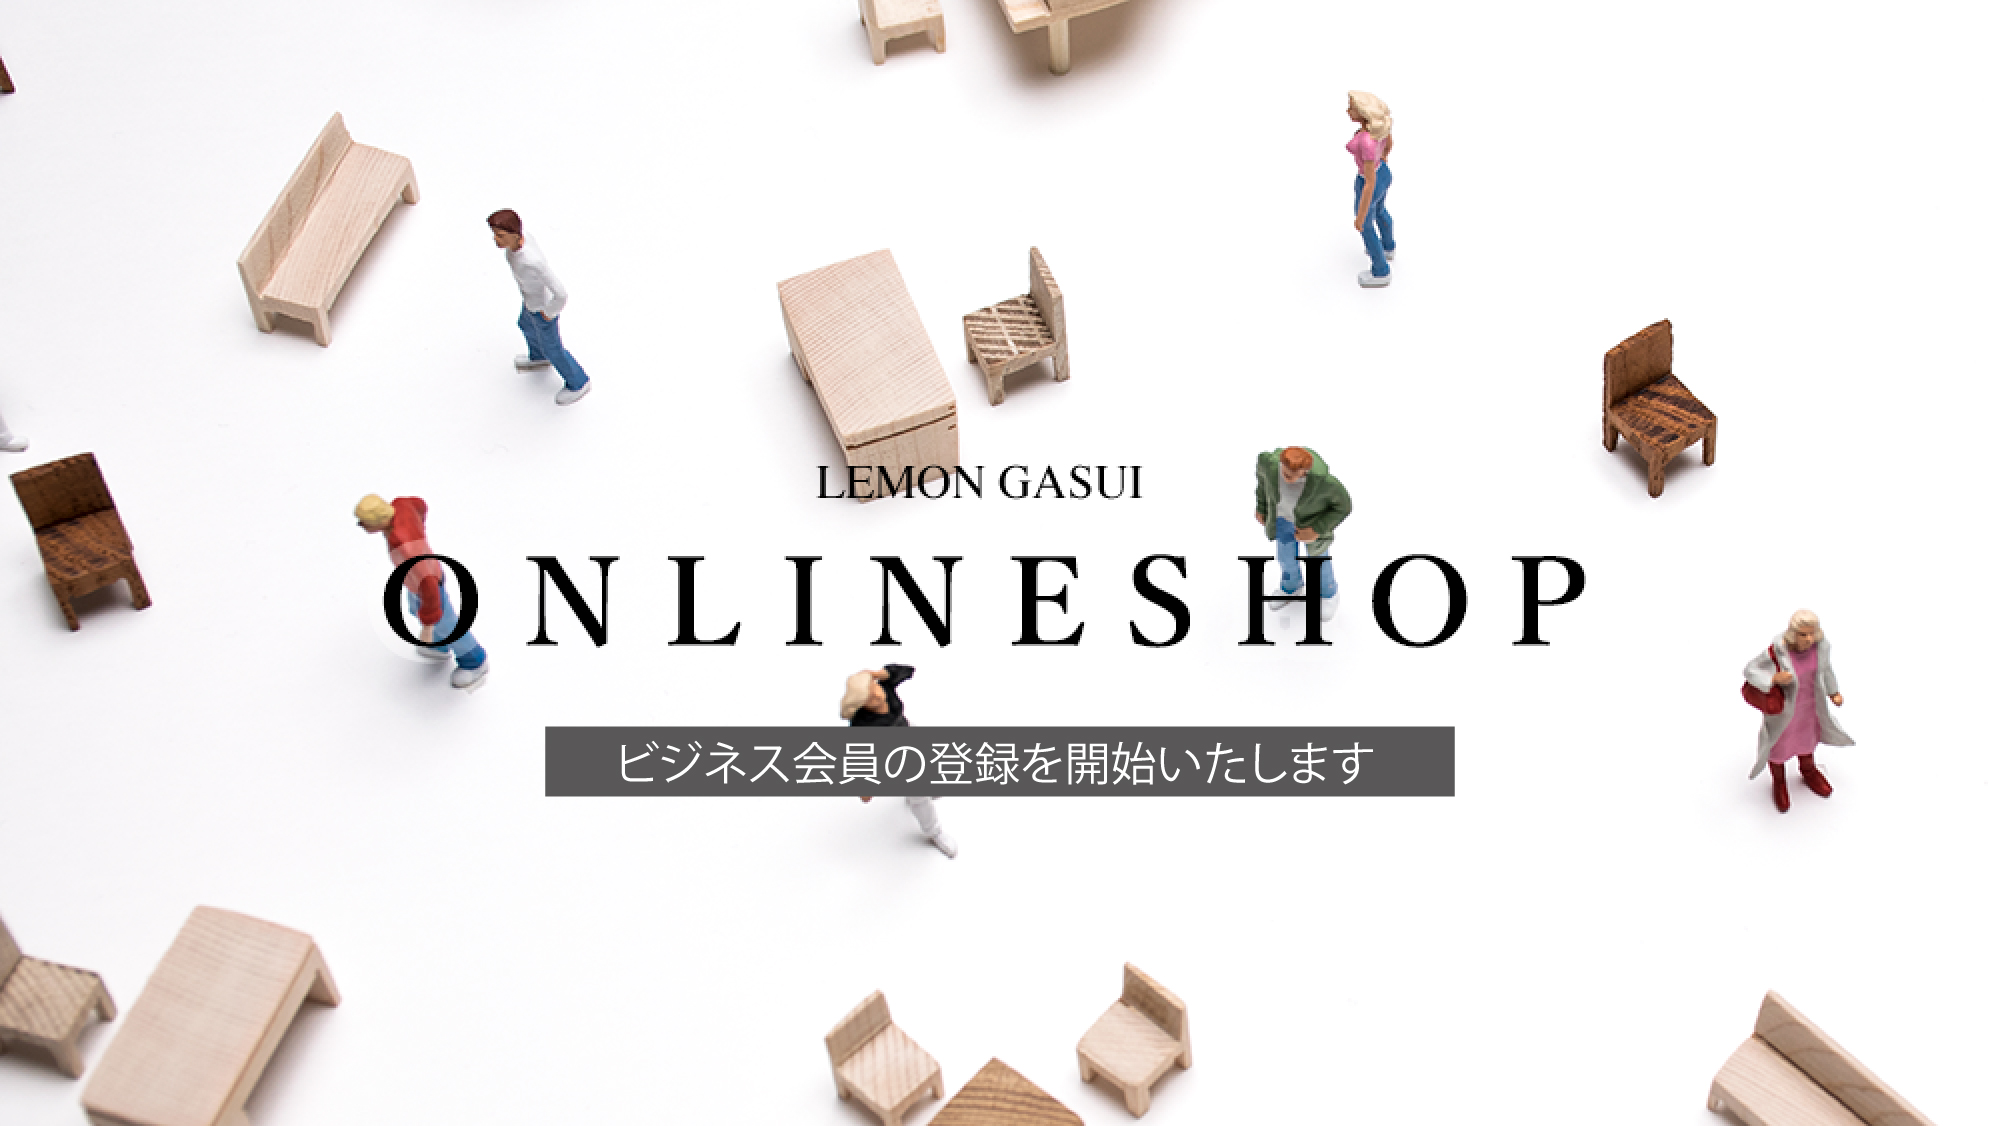 onlineshop_top(ビジネス会員)